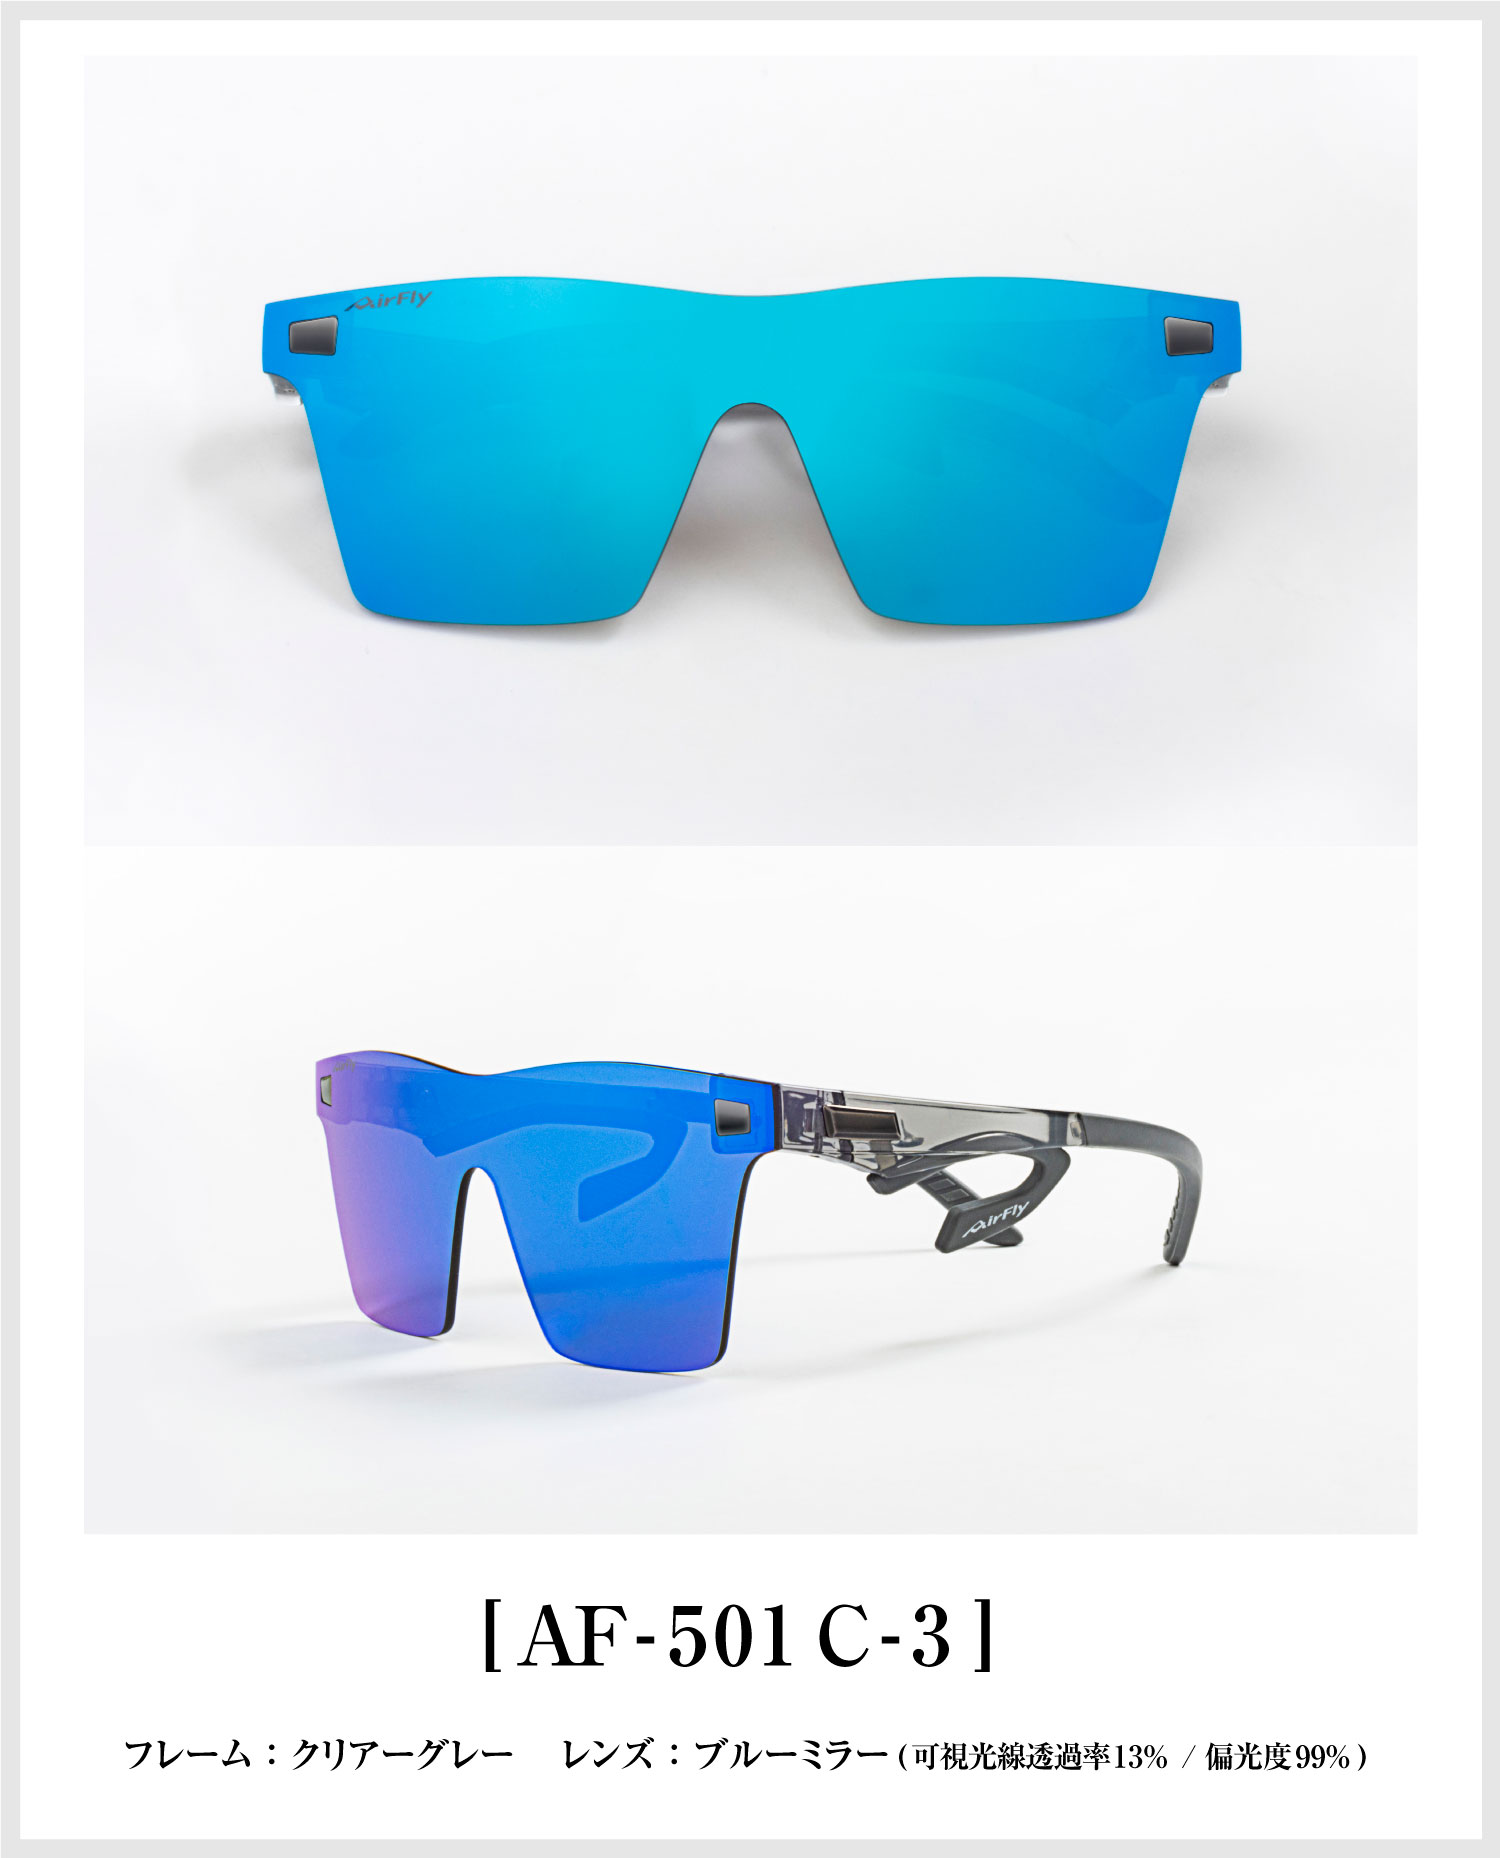 AF-501 C-3 sports-casual sunglasses AirFly